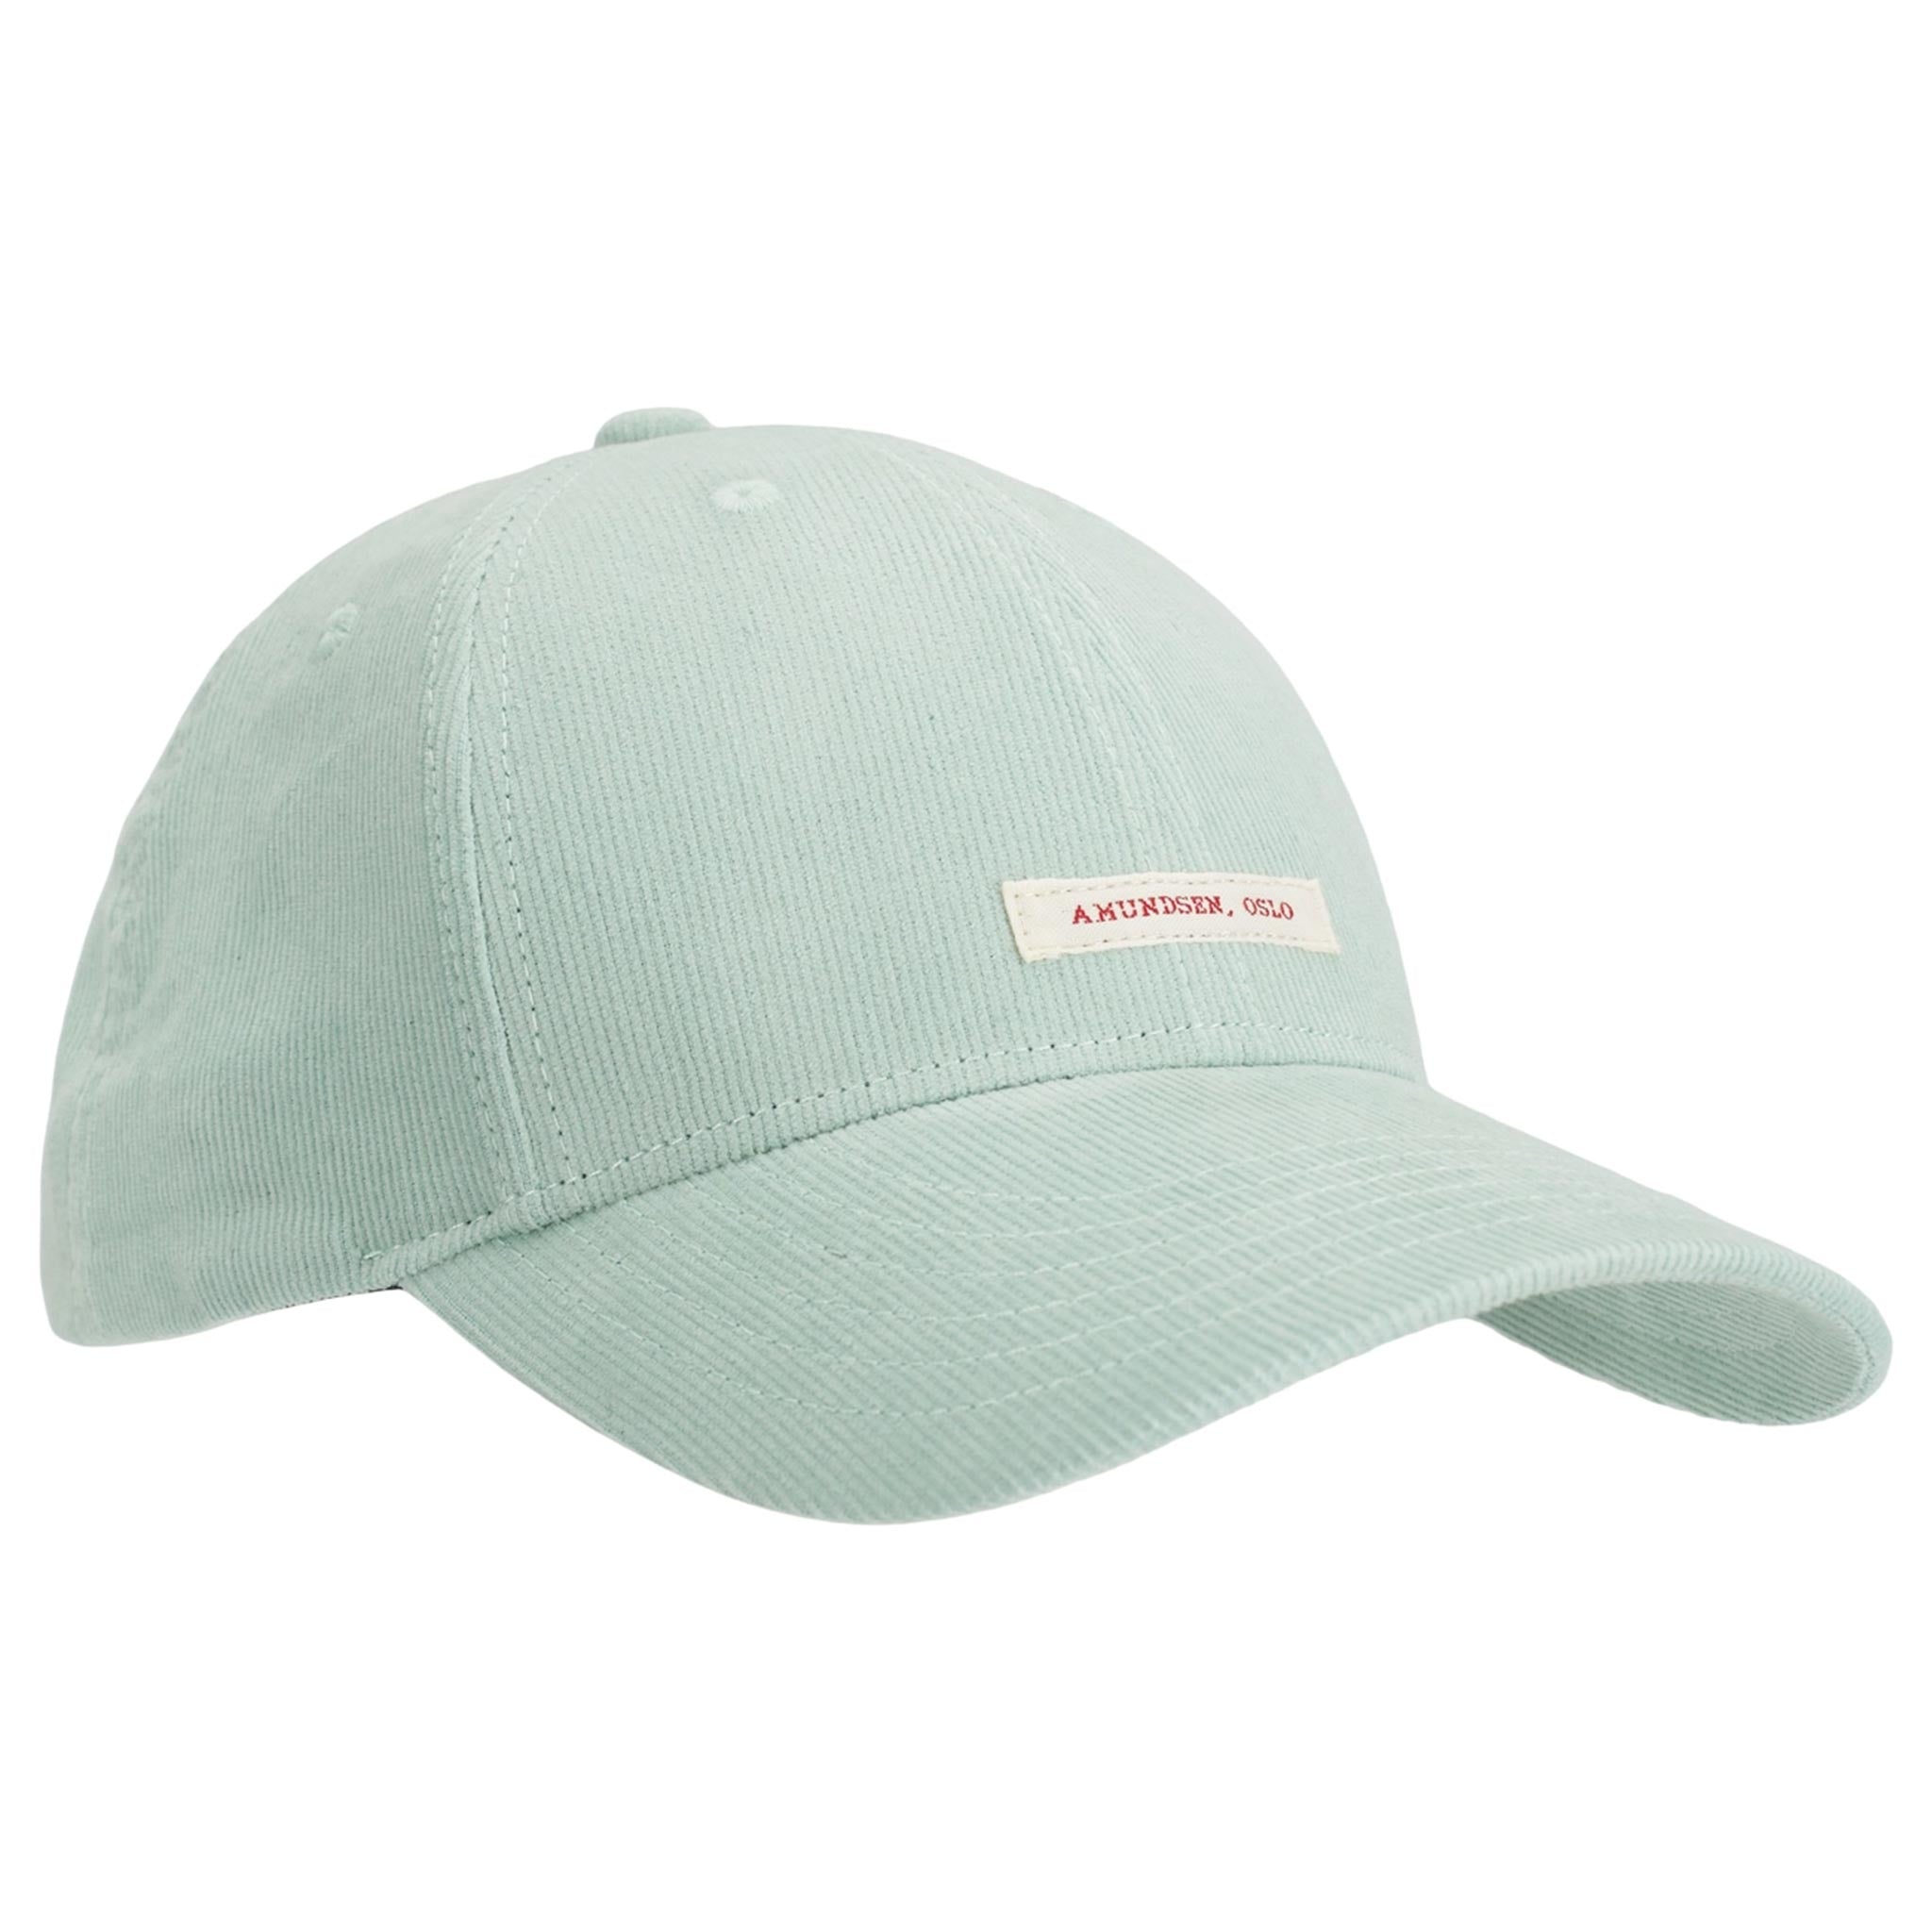 Concord Patch Cap in Grey Mist